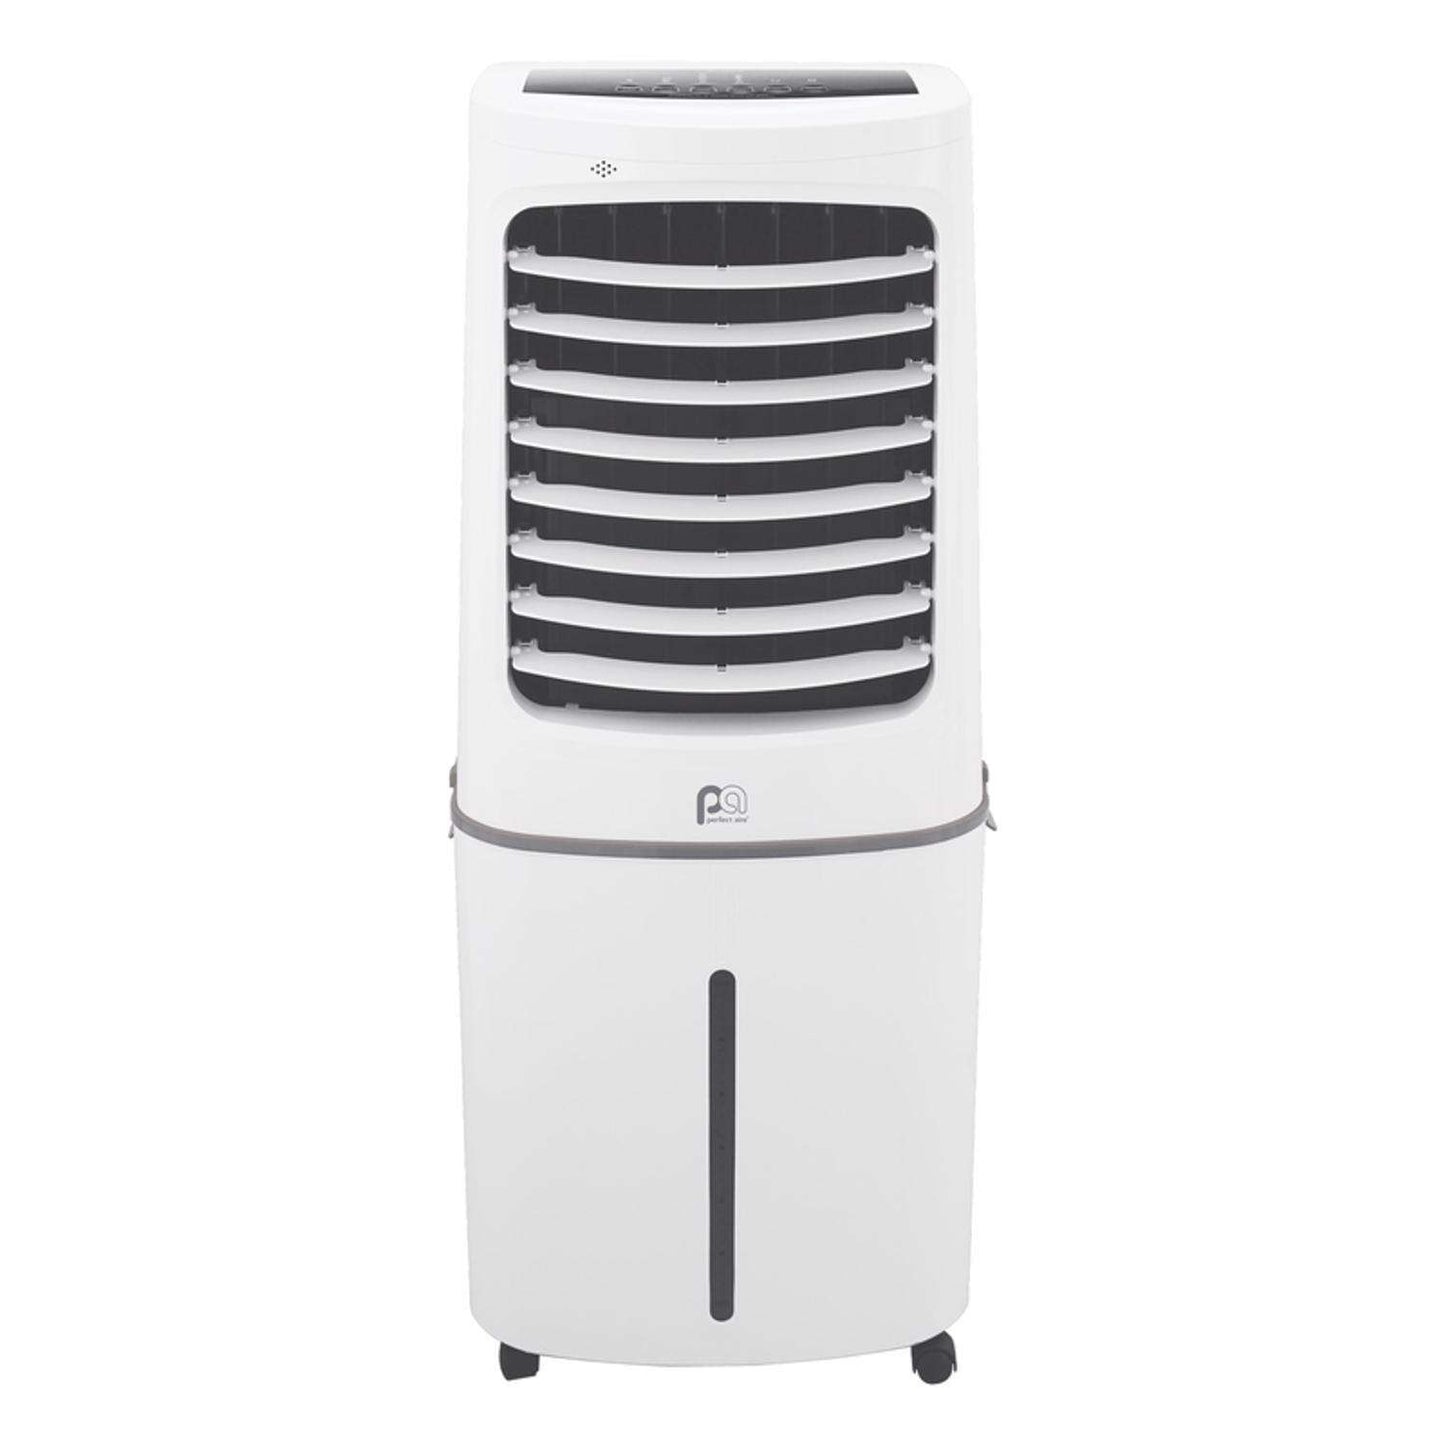 PerfectAire | 13.2 Gallon Programmable Indoor Evaporative Cooler for 500 sq ft